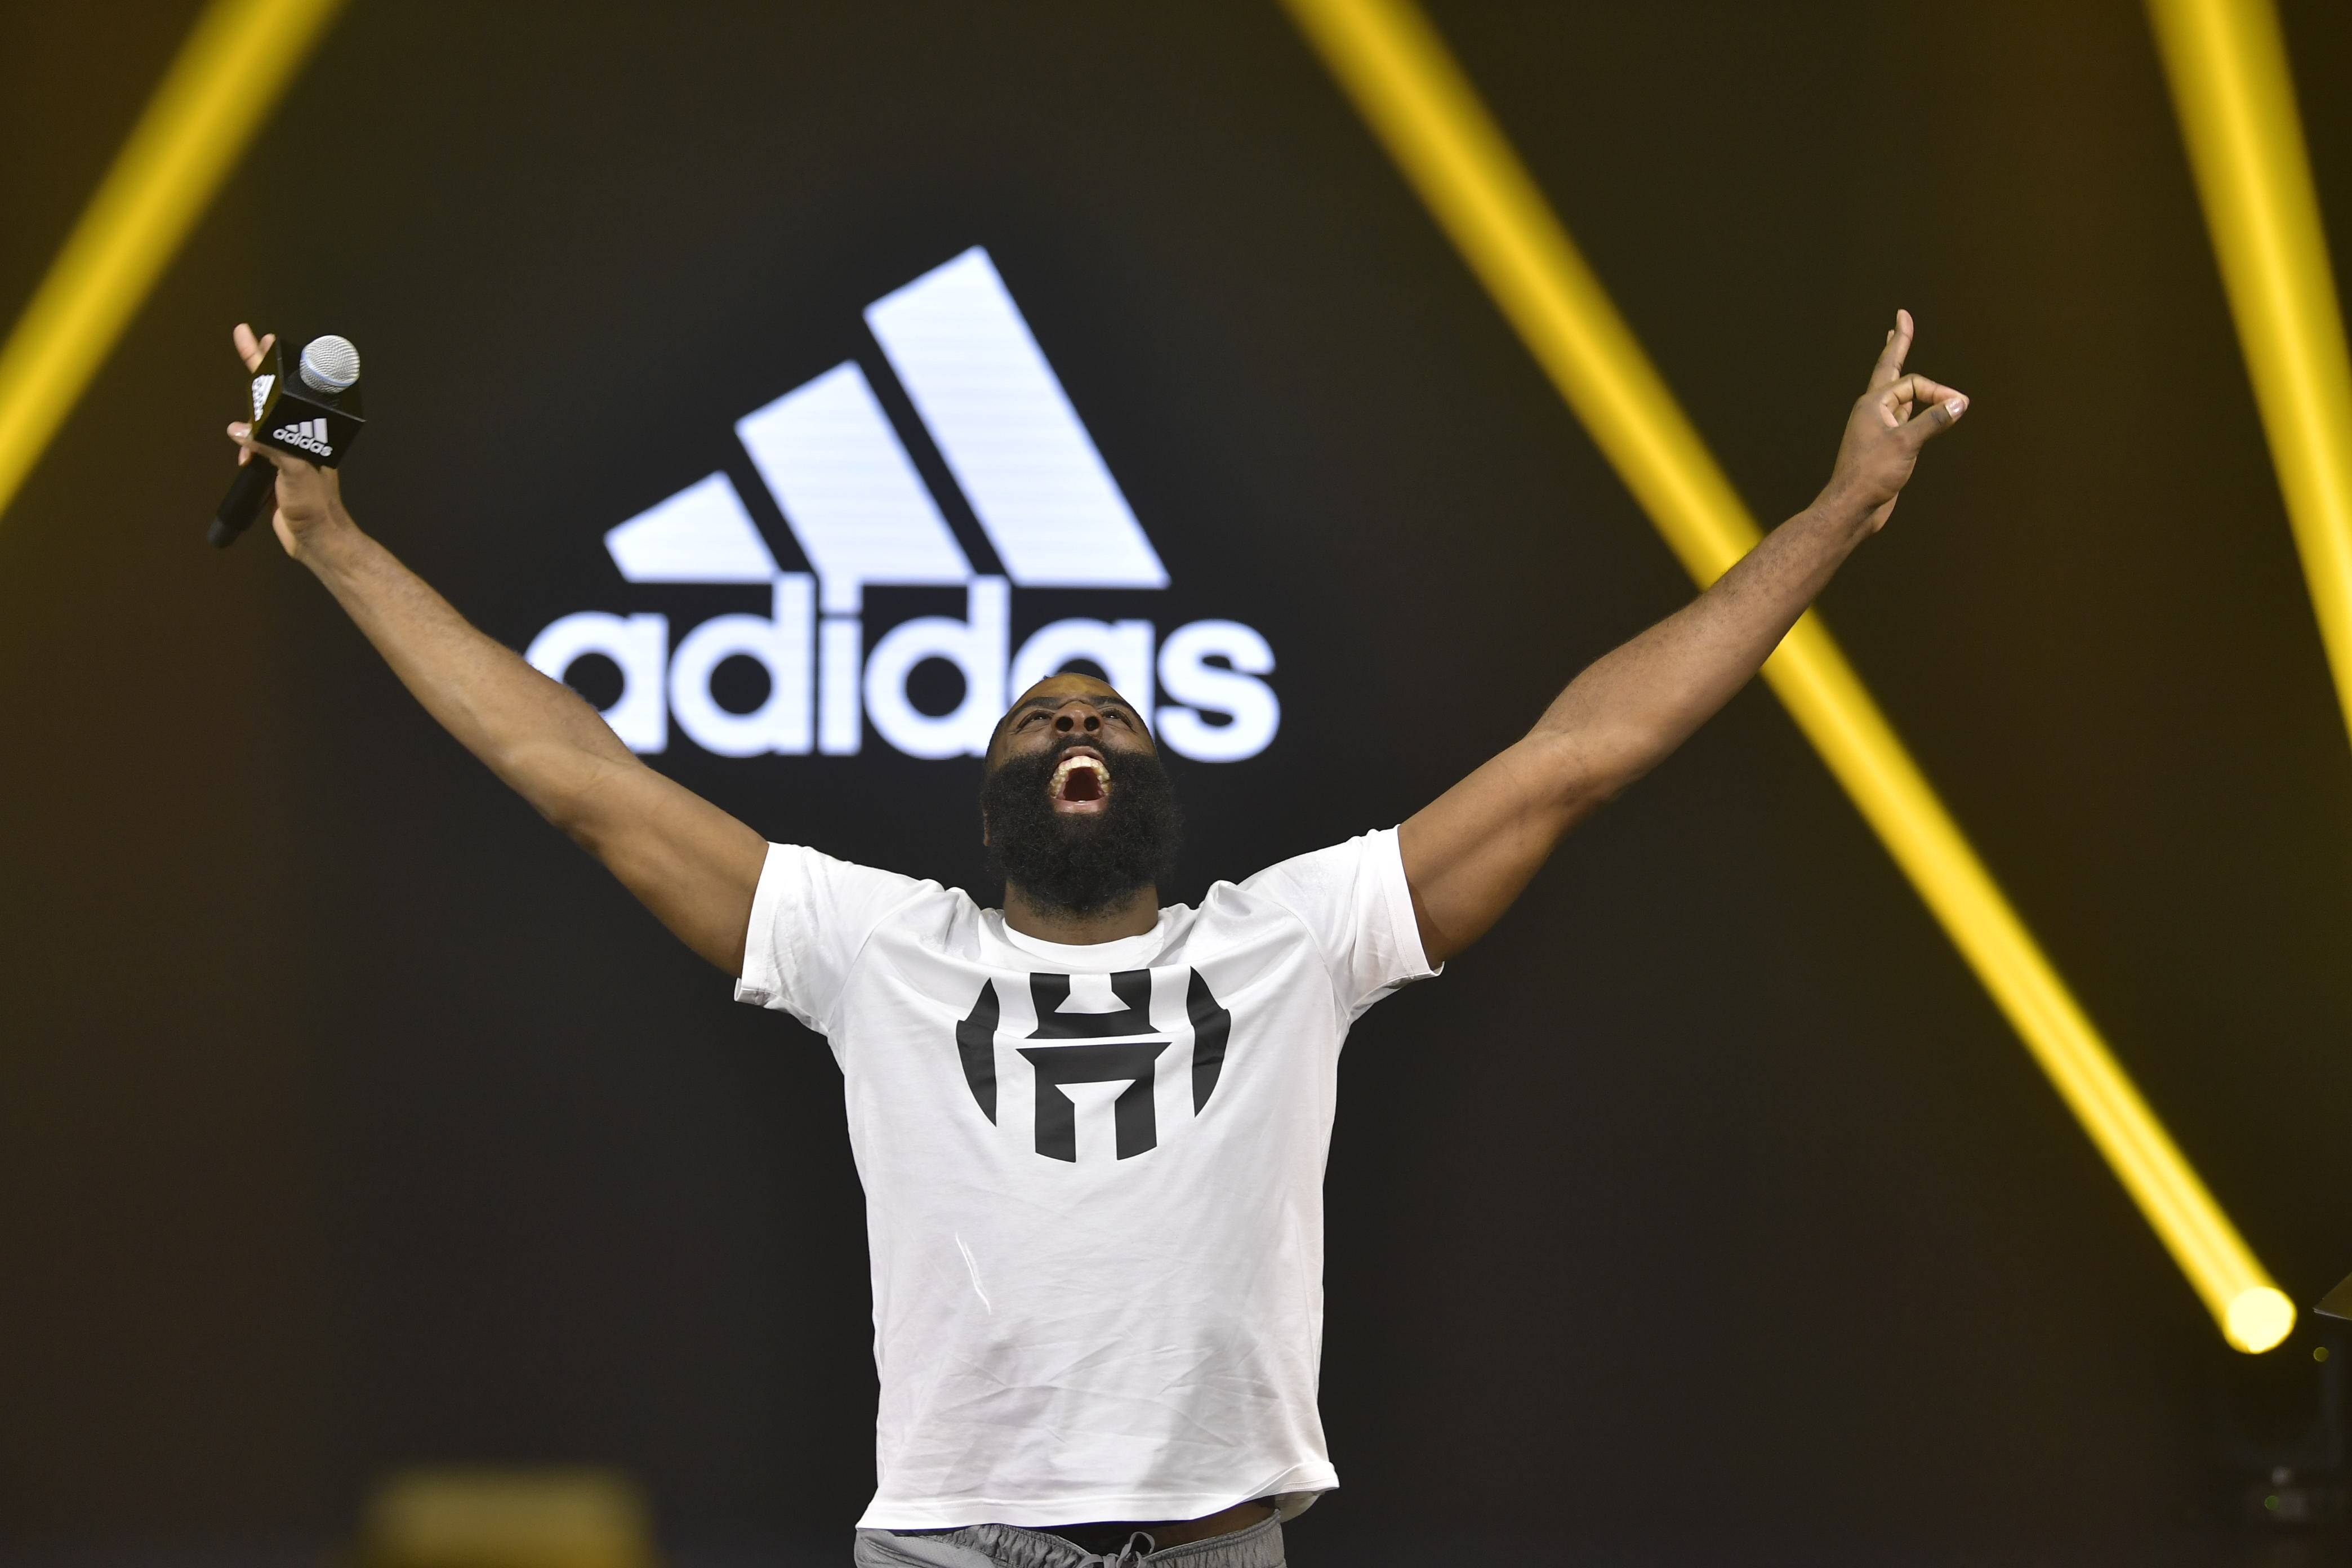 Adidas Goes After Nike with Strategy